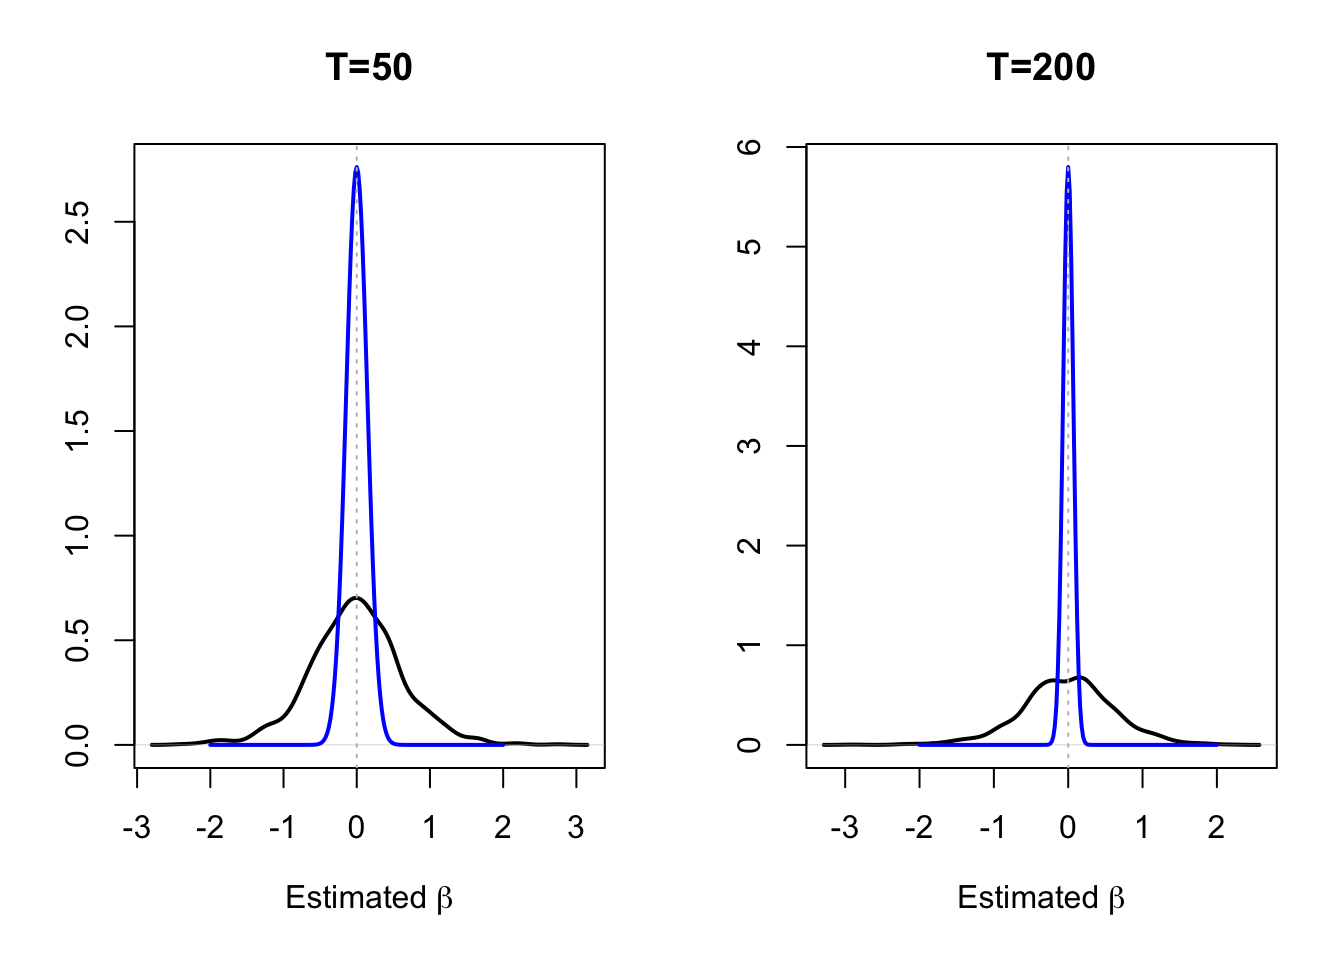 The densities of based on 1000 simulations of samples of length $T$, they are approximated by the kernel approach.